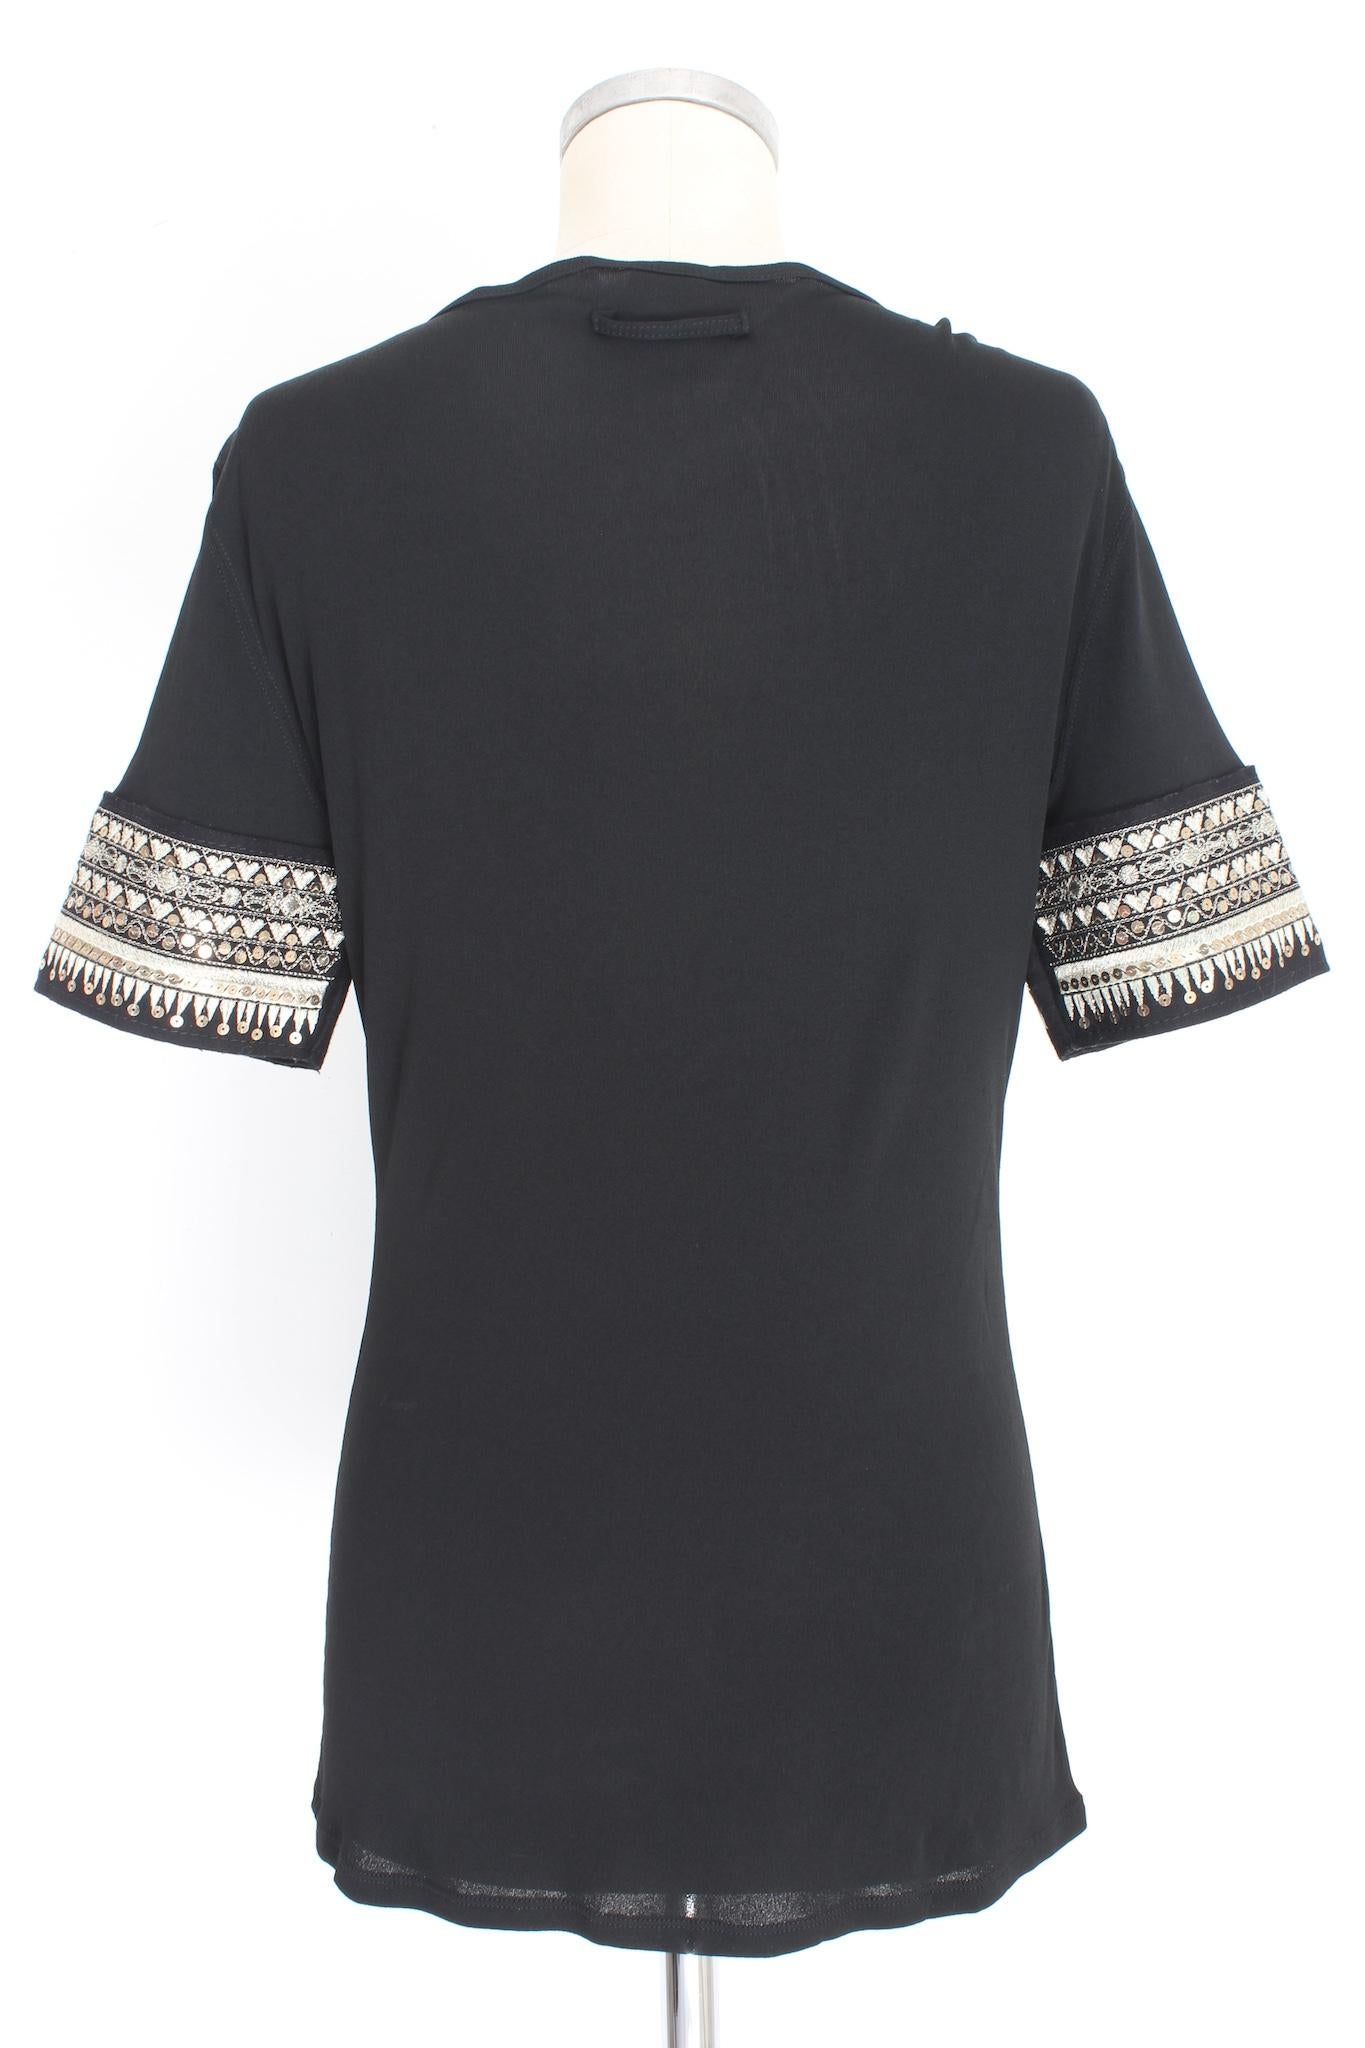 Jean Paul Gaultier 2000s T shirt. Long shirt, black, embellished on the sleeves with gold-colored embroidery and sequins, along the chest part in leather with studs. 100% rayon, 100% sheepskin fabric. Made in italy.

Size: 44 It 10 Us 12